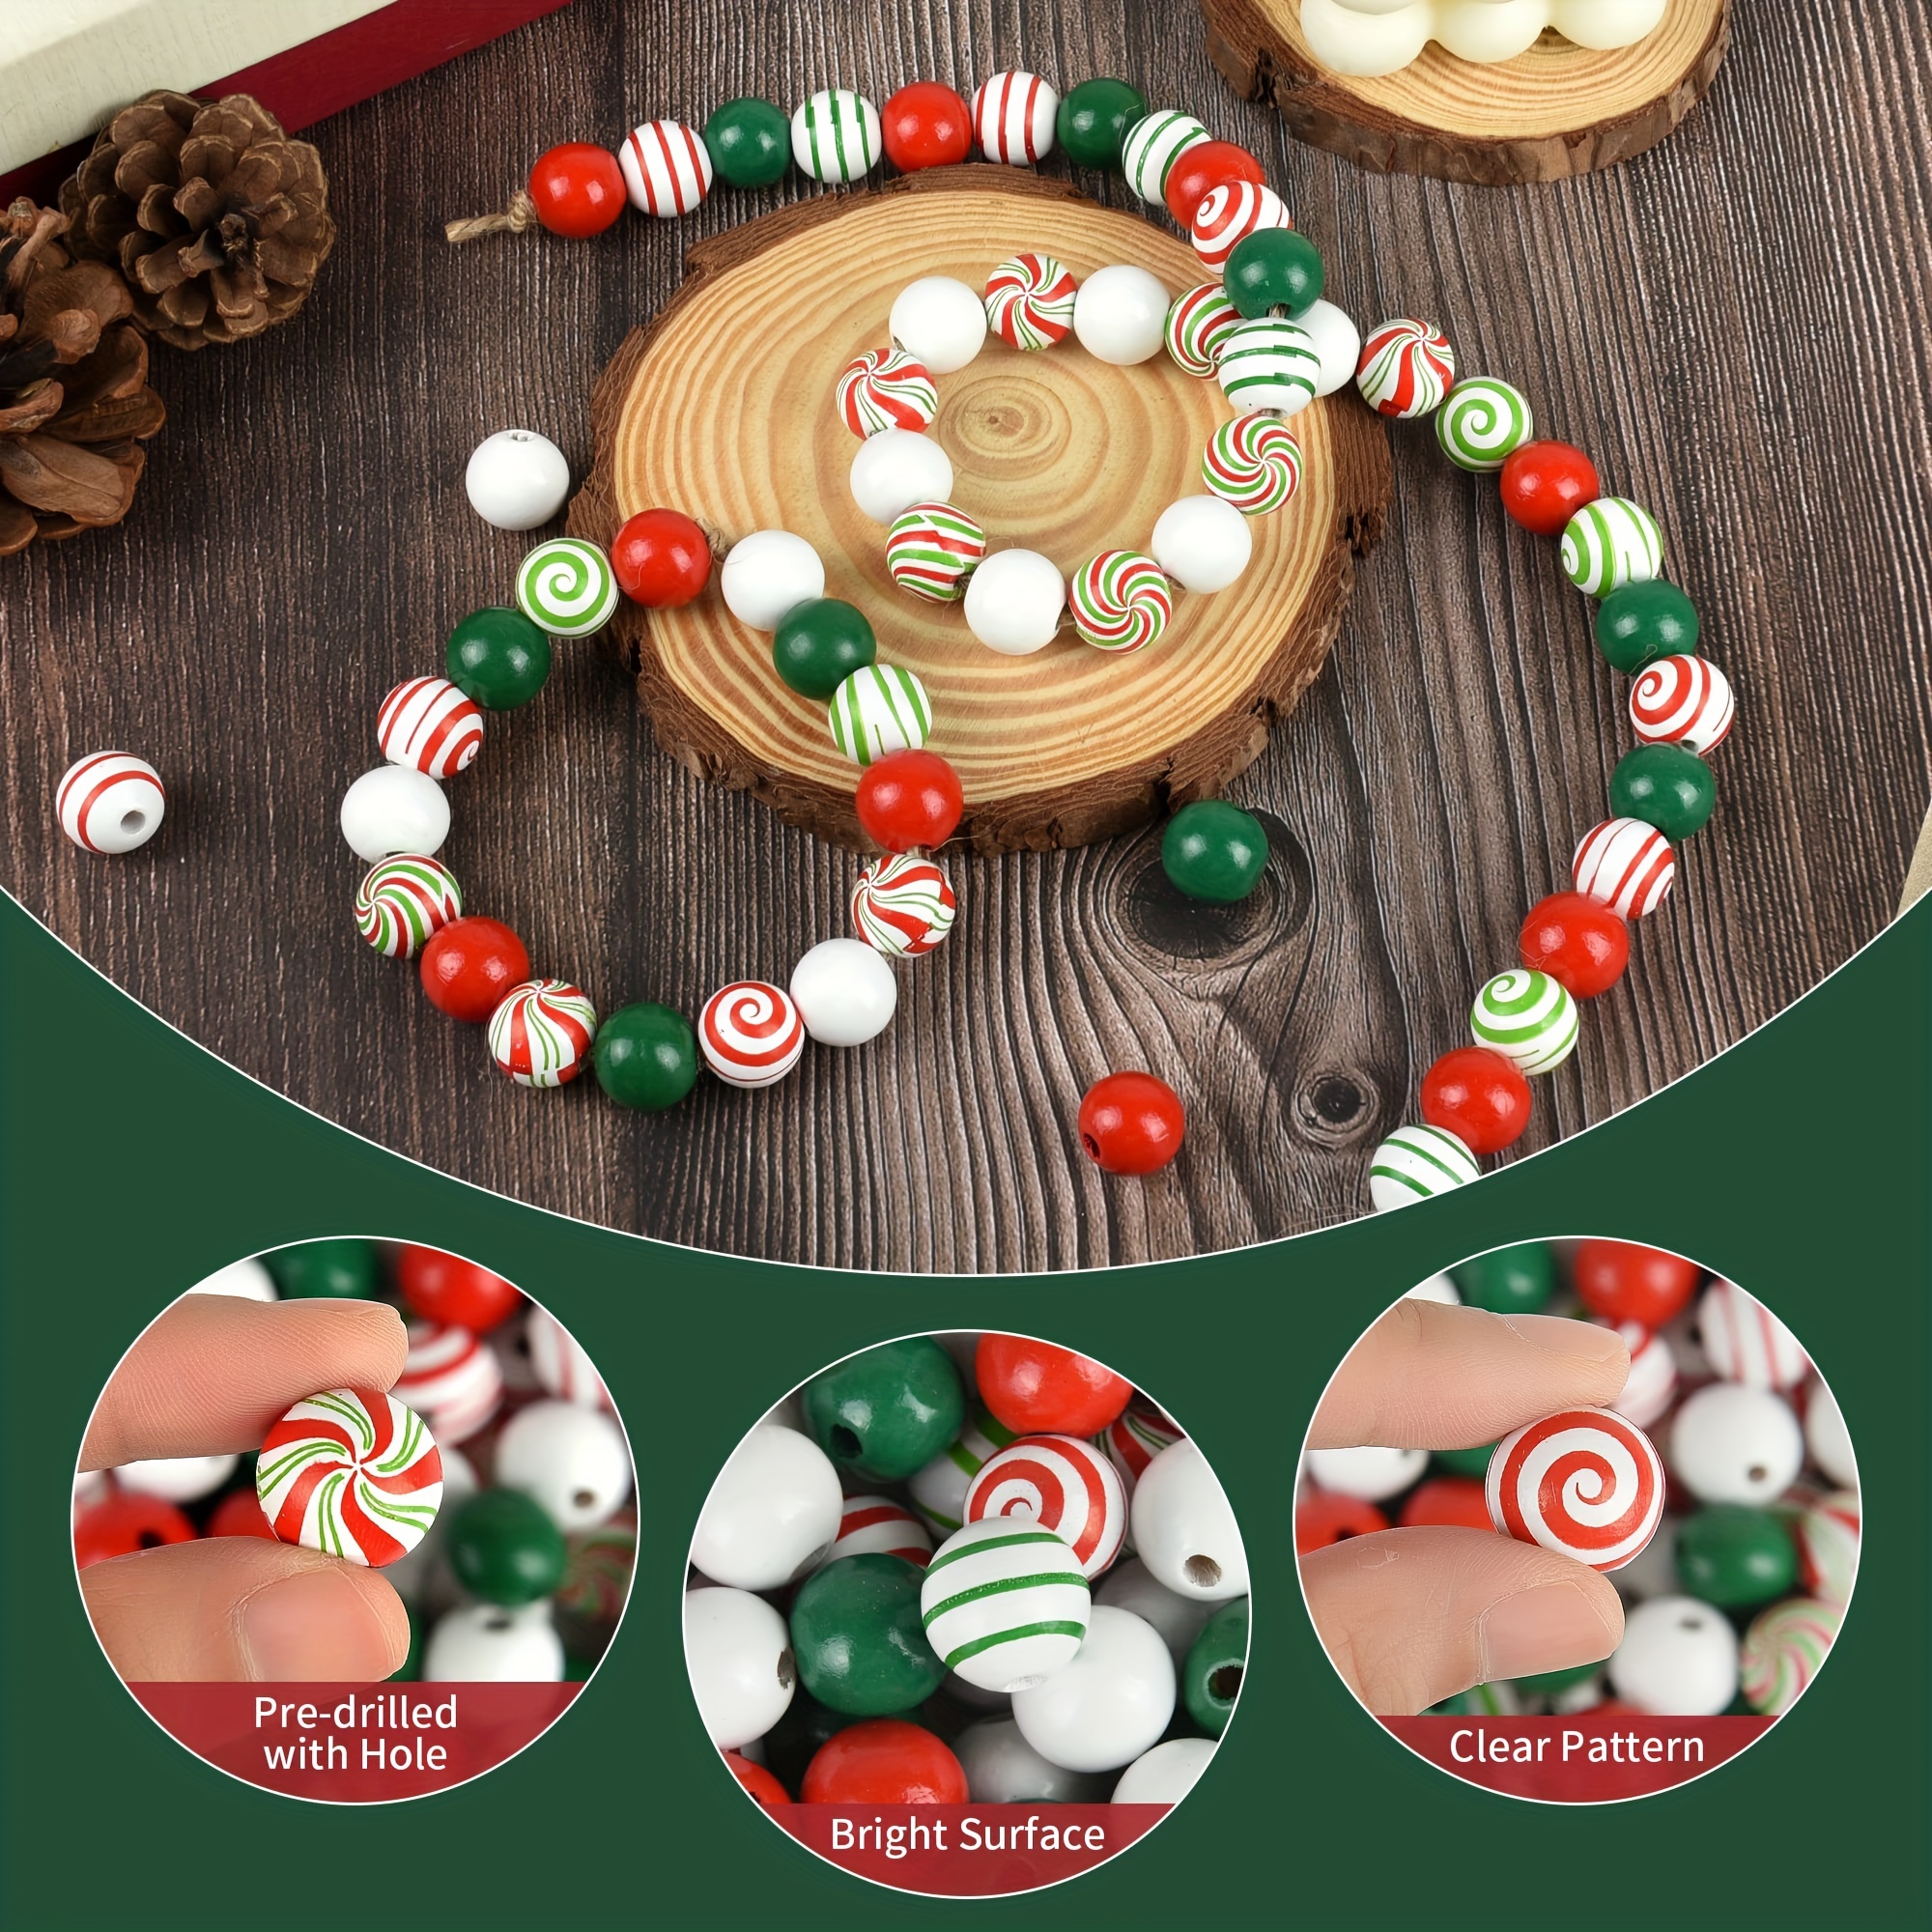  180 Pcs Candy Cane Wood Beads 16mm Christmas Wooden Beads  Colorful Round Craft Beads with Holes, Christmas Dotted Striped Farmhouse  Spacer Wood Beads for Christmas Party Holiday DIY Garland Jewelry 